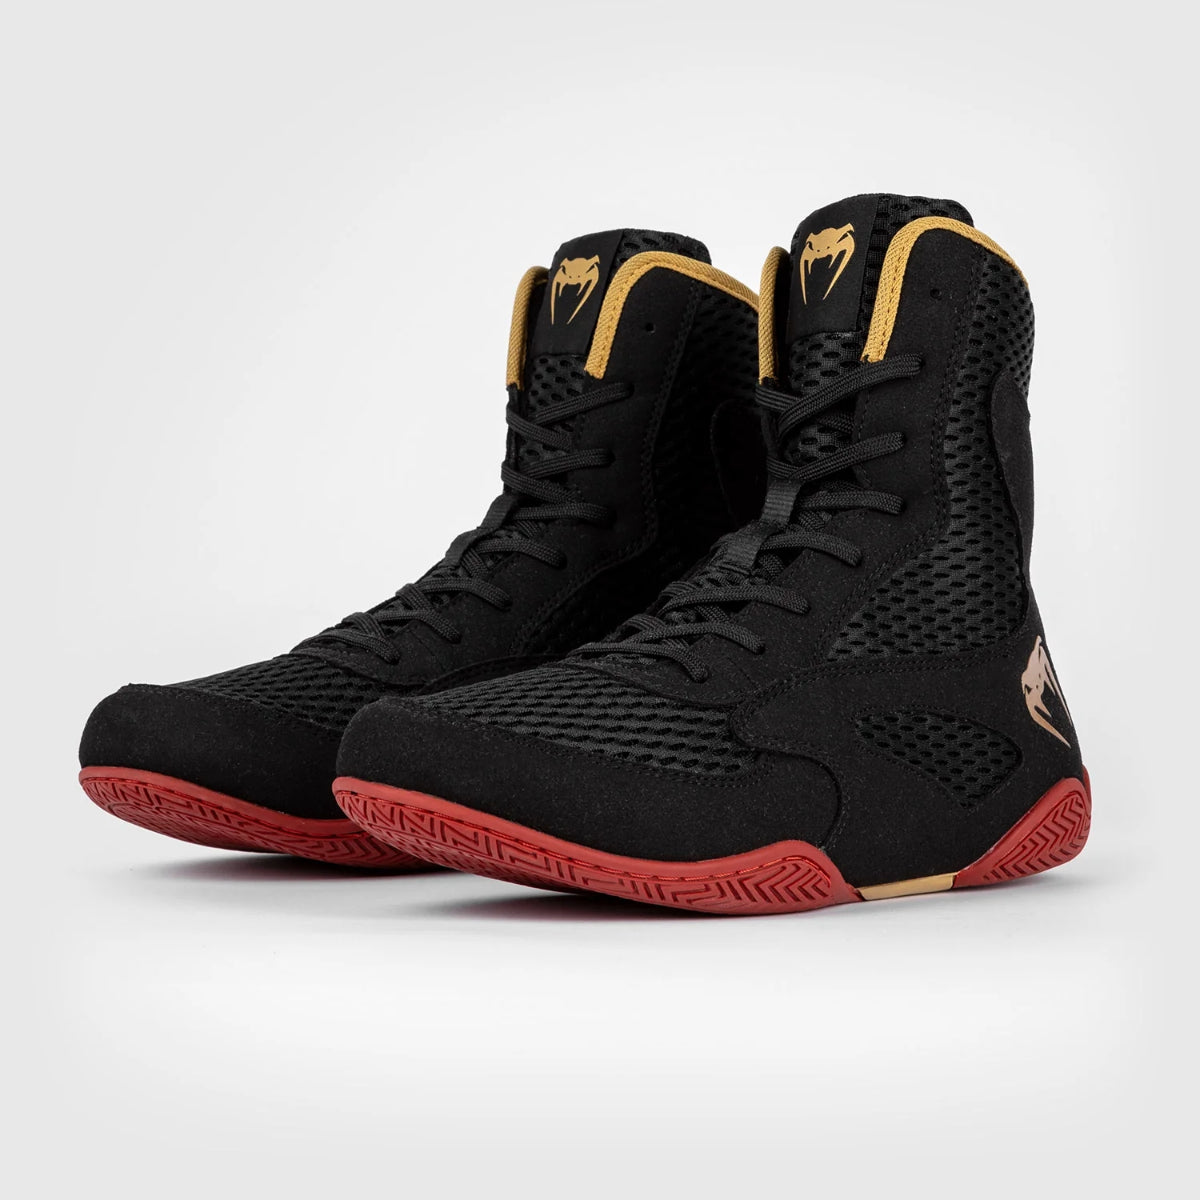 Black/Gold/Red Venum Contender Boxing Shoes from Made4Fighters